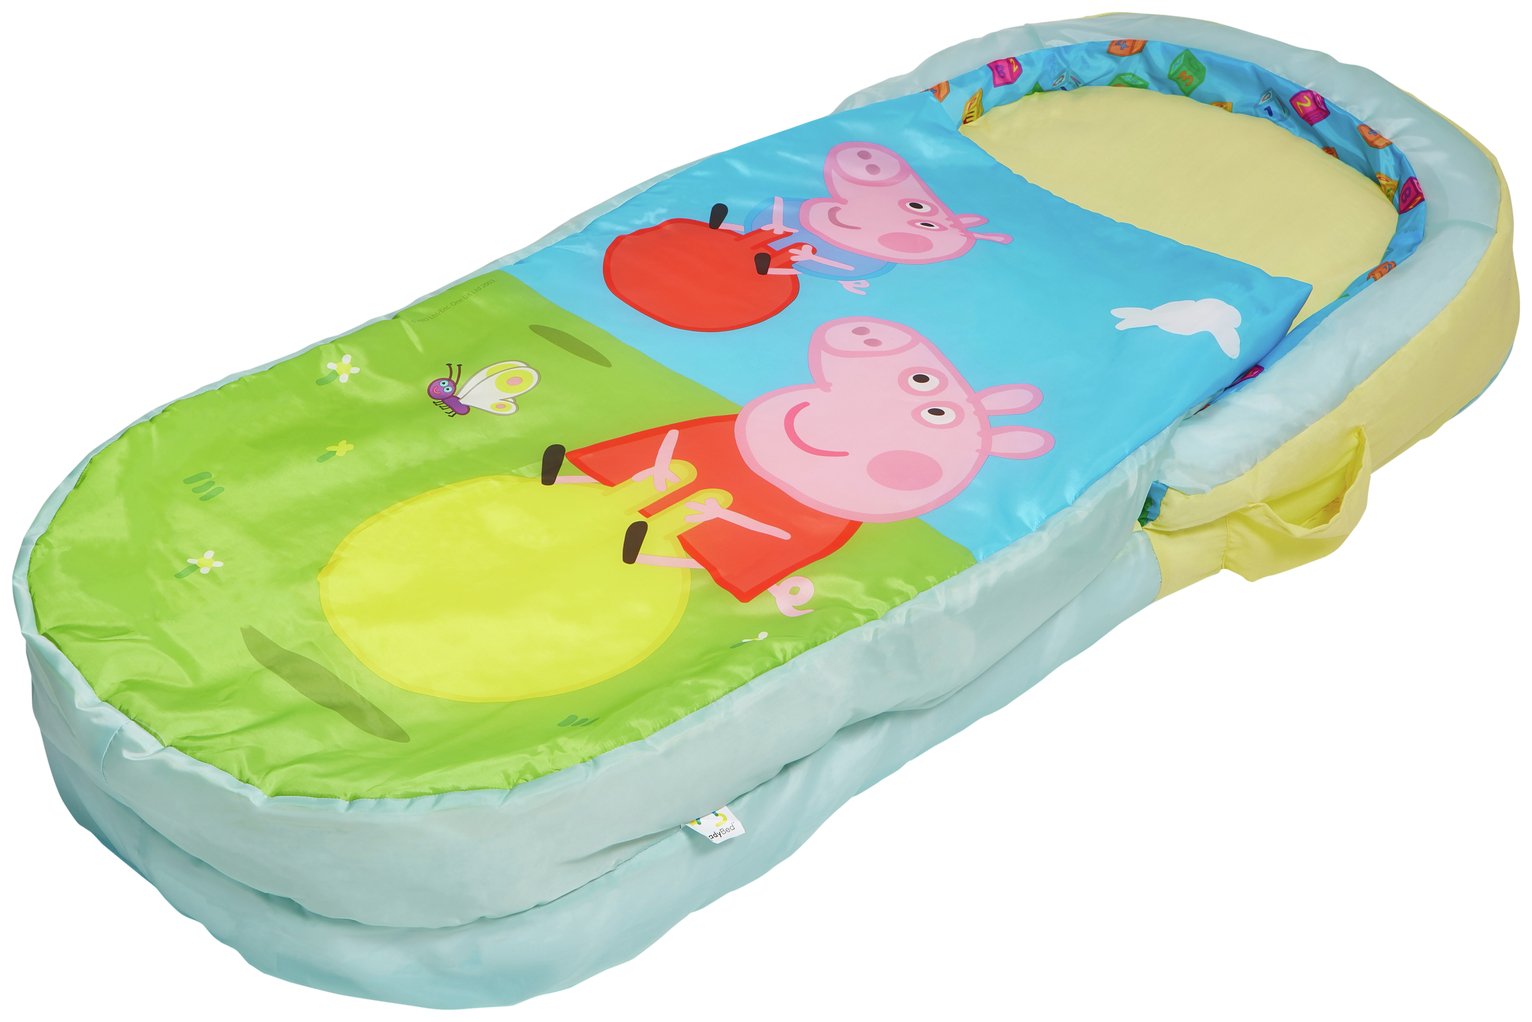 Peppa Pig My First ReadyBed Kids Air Bed and Sleeping Bag